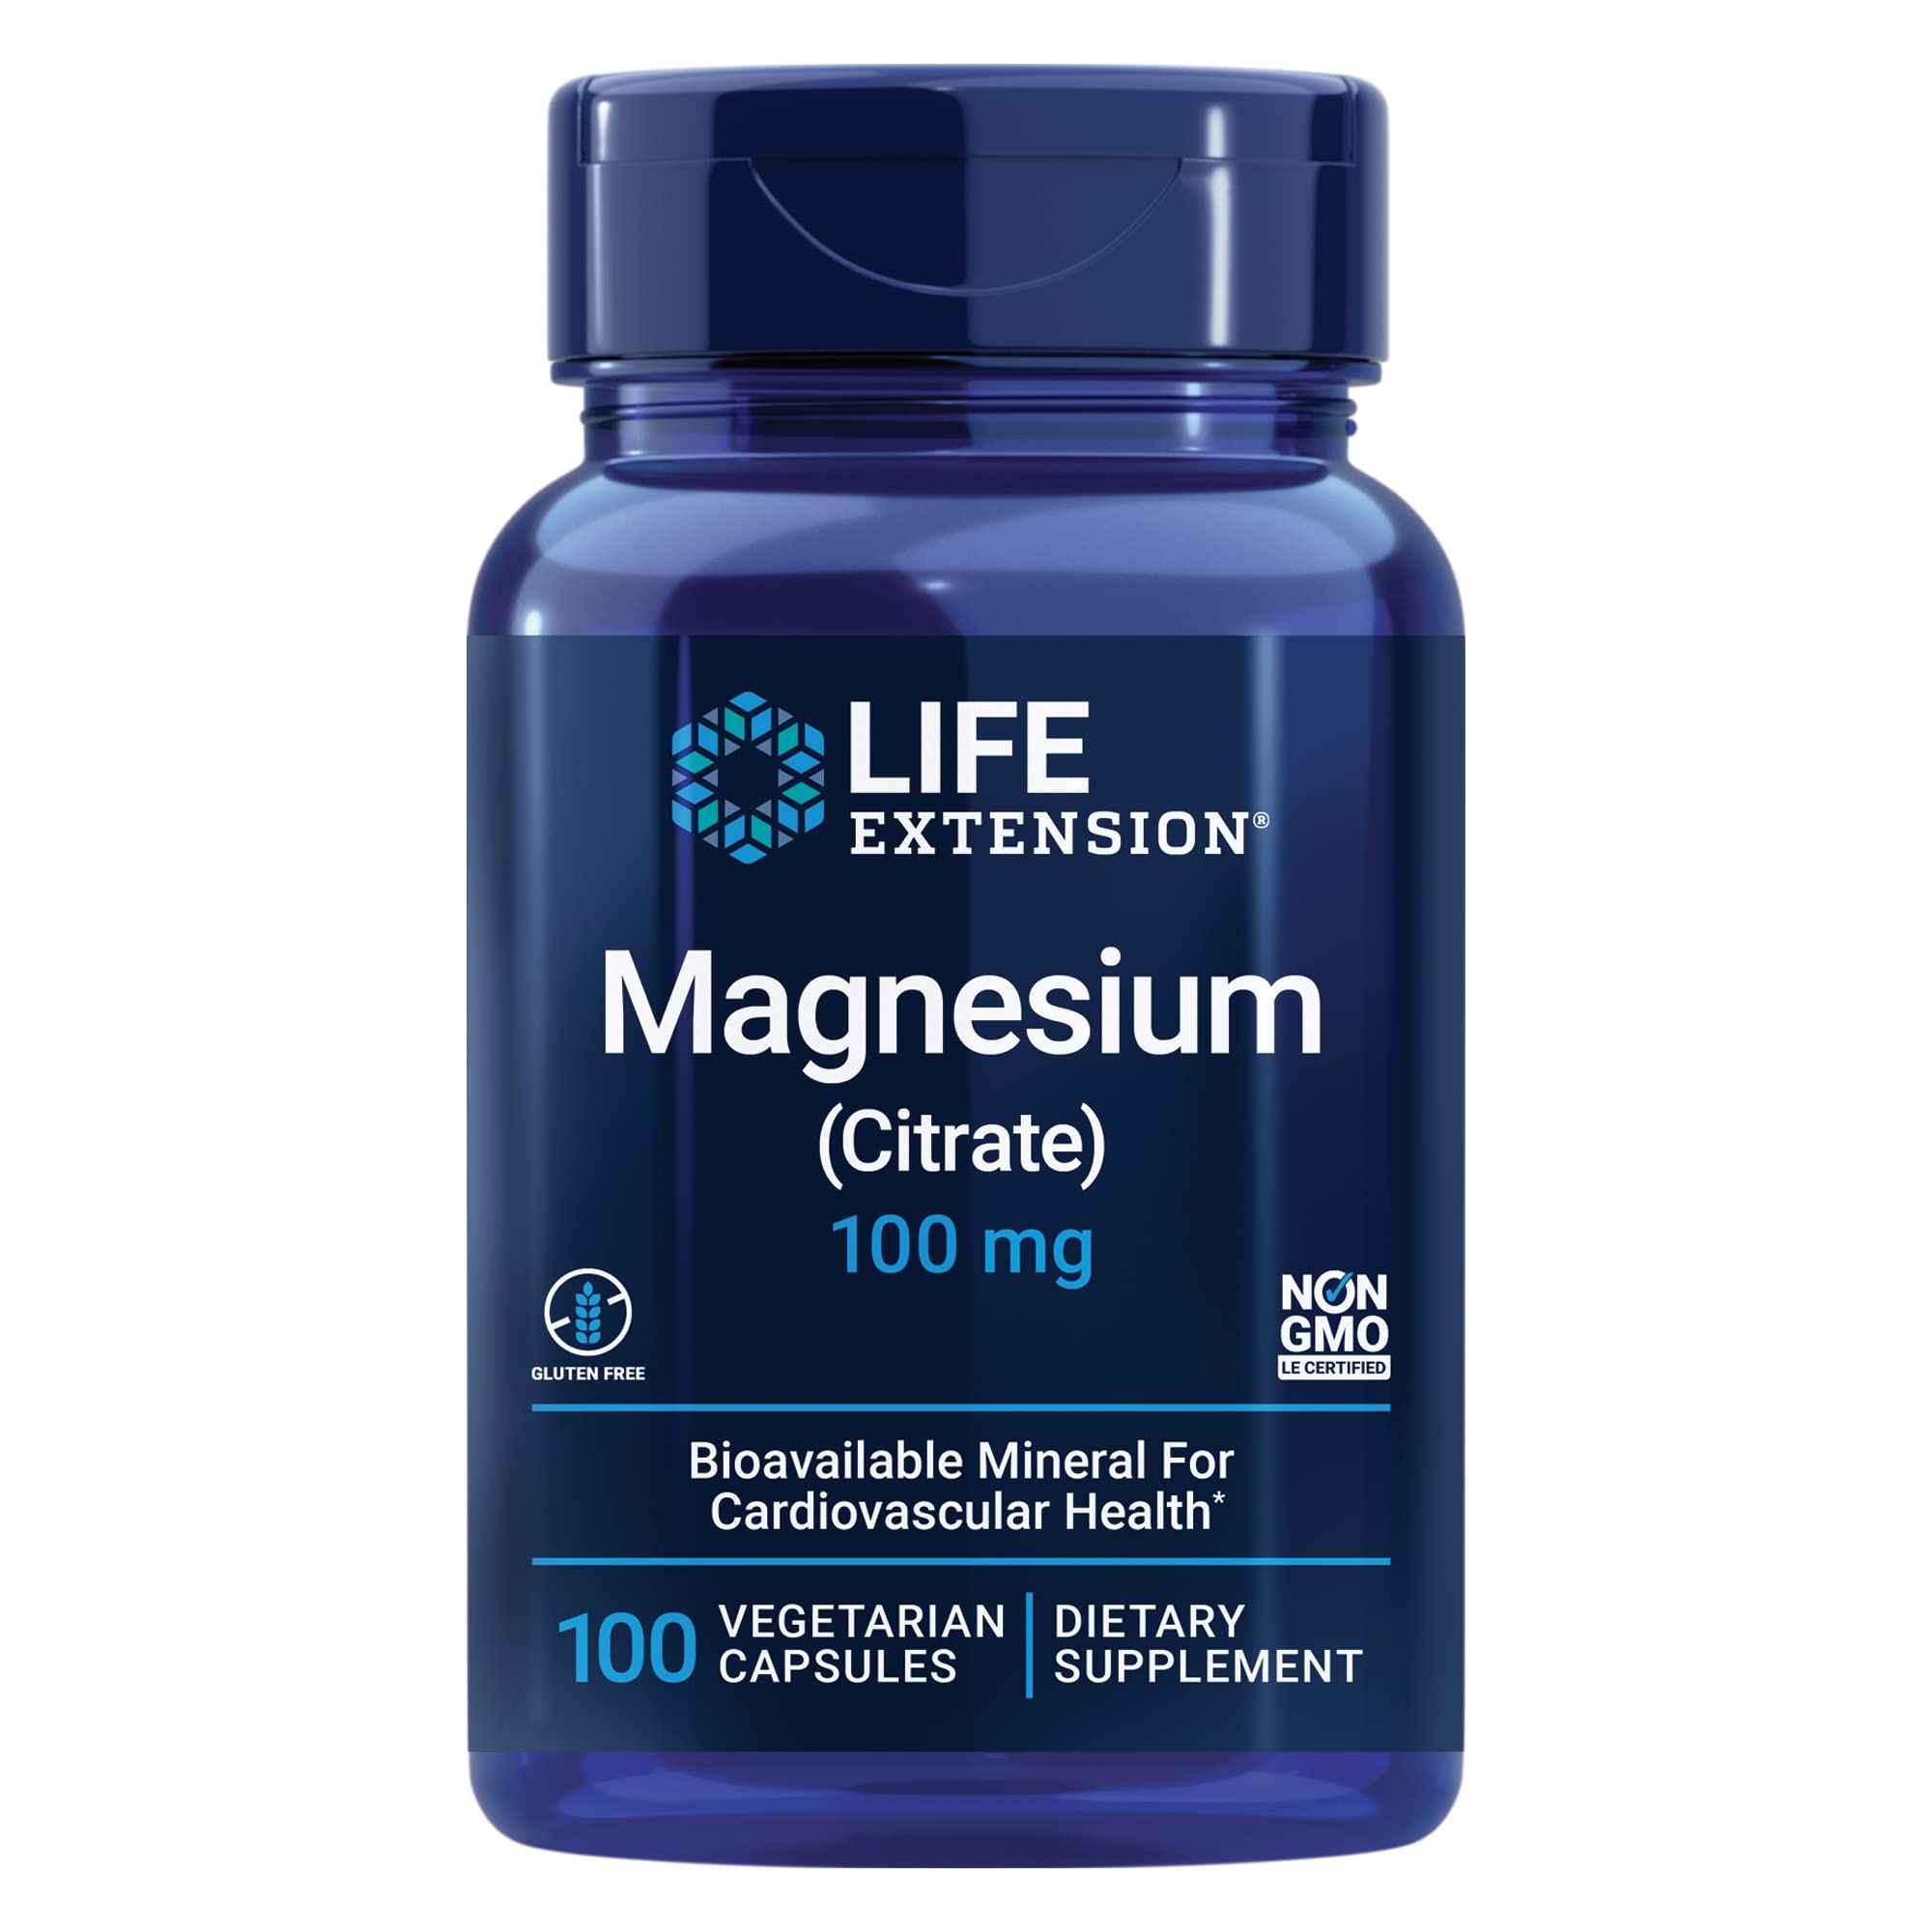 Life Extension Magnesium (Citrate)鎂（含檸檬酸）100 mg 100膠囊